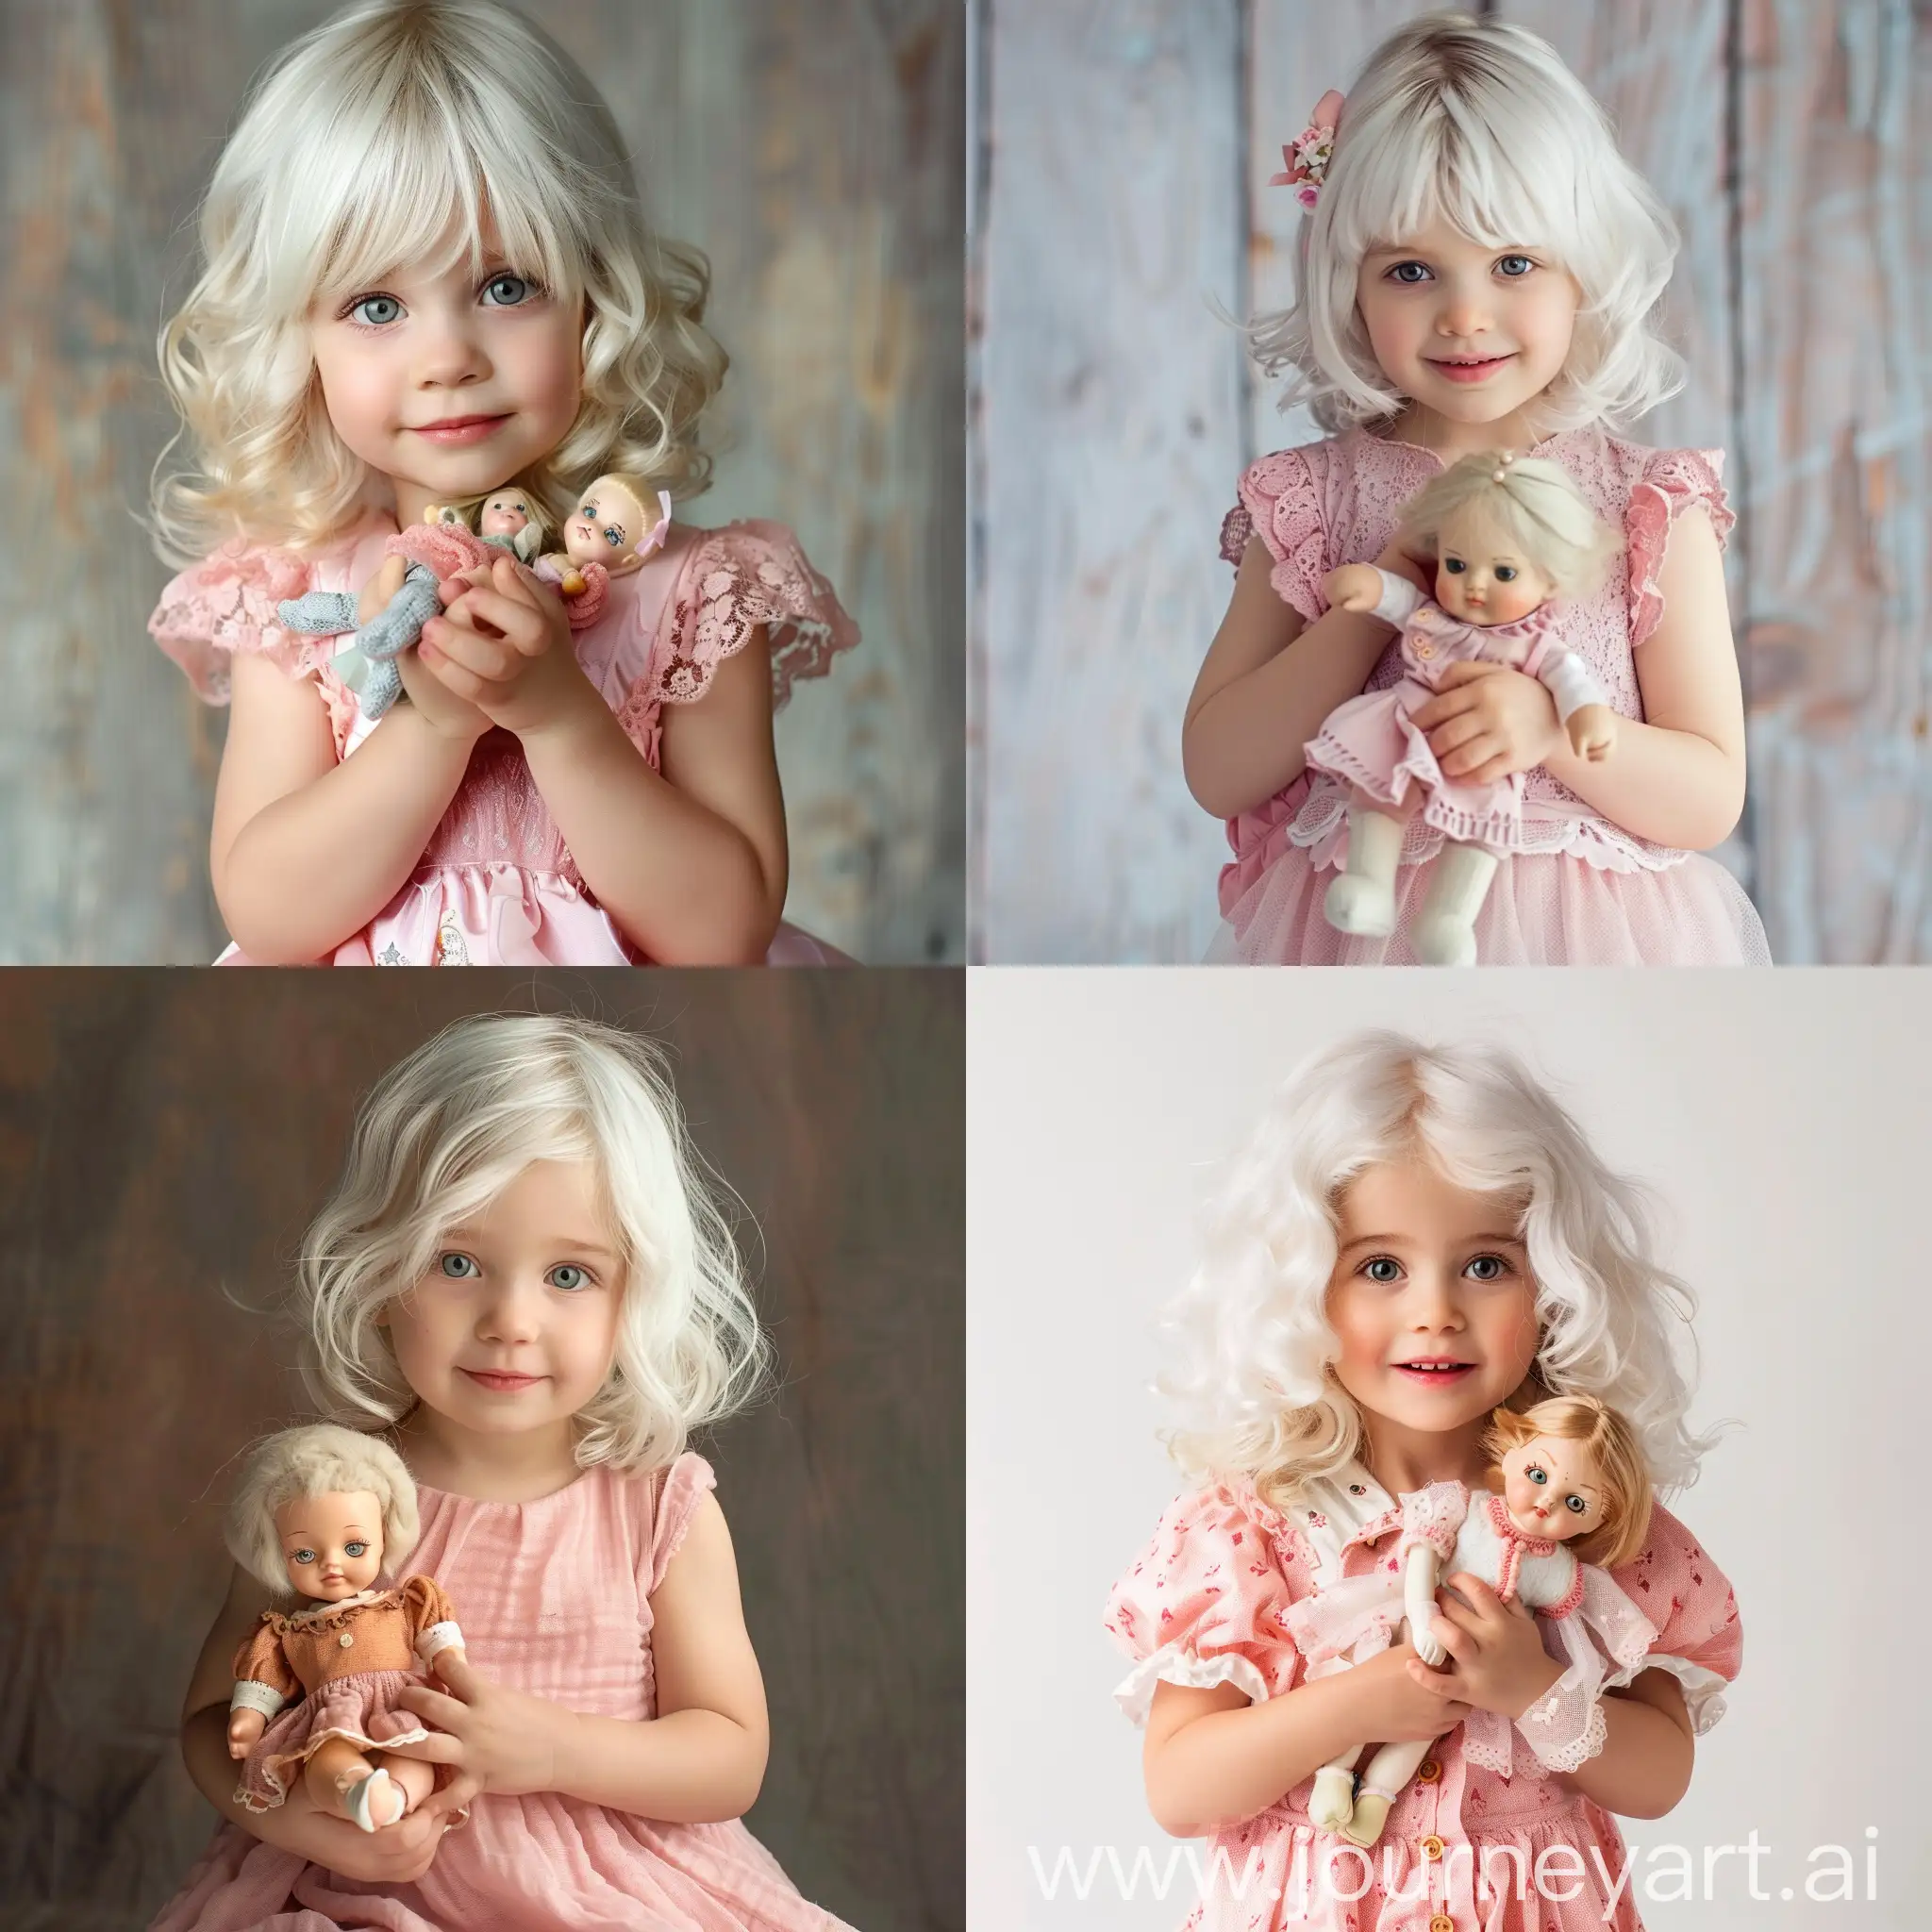 Adorable-Little-Girl-with-White-Hair-and-Pink-Dress-Holding-a-Doll